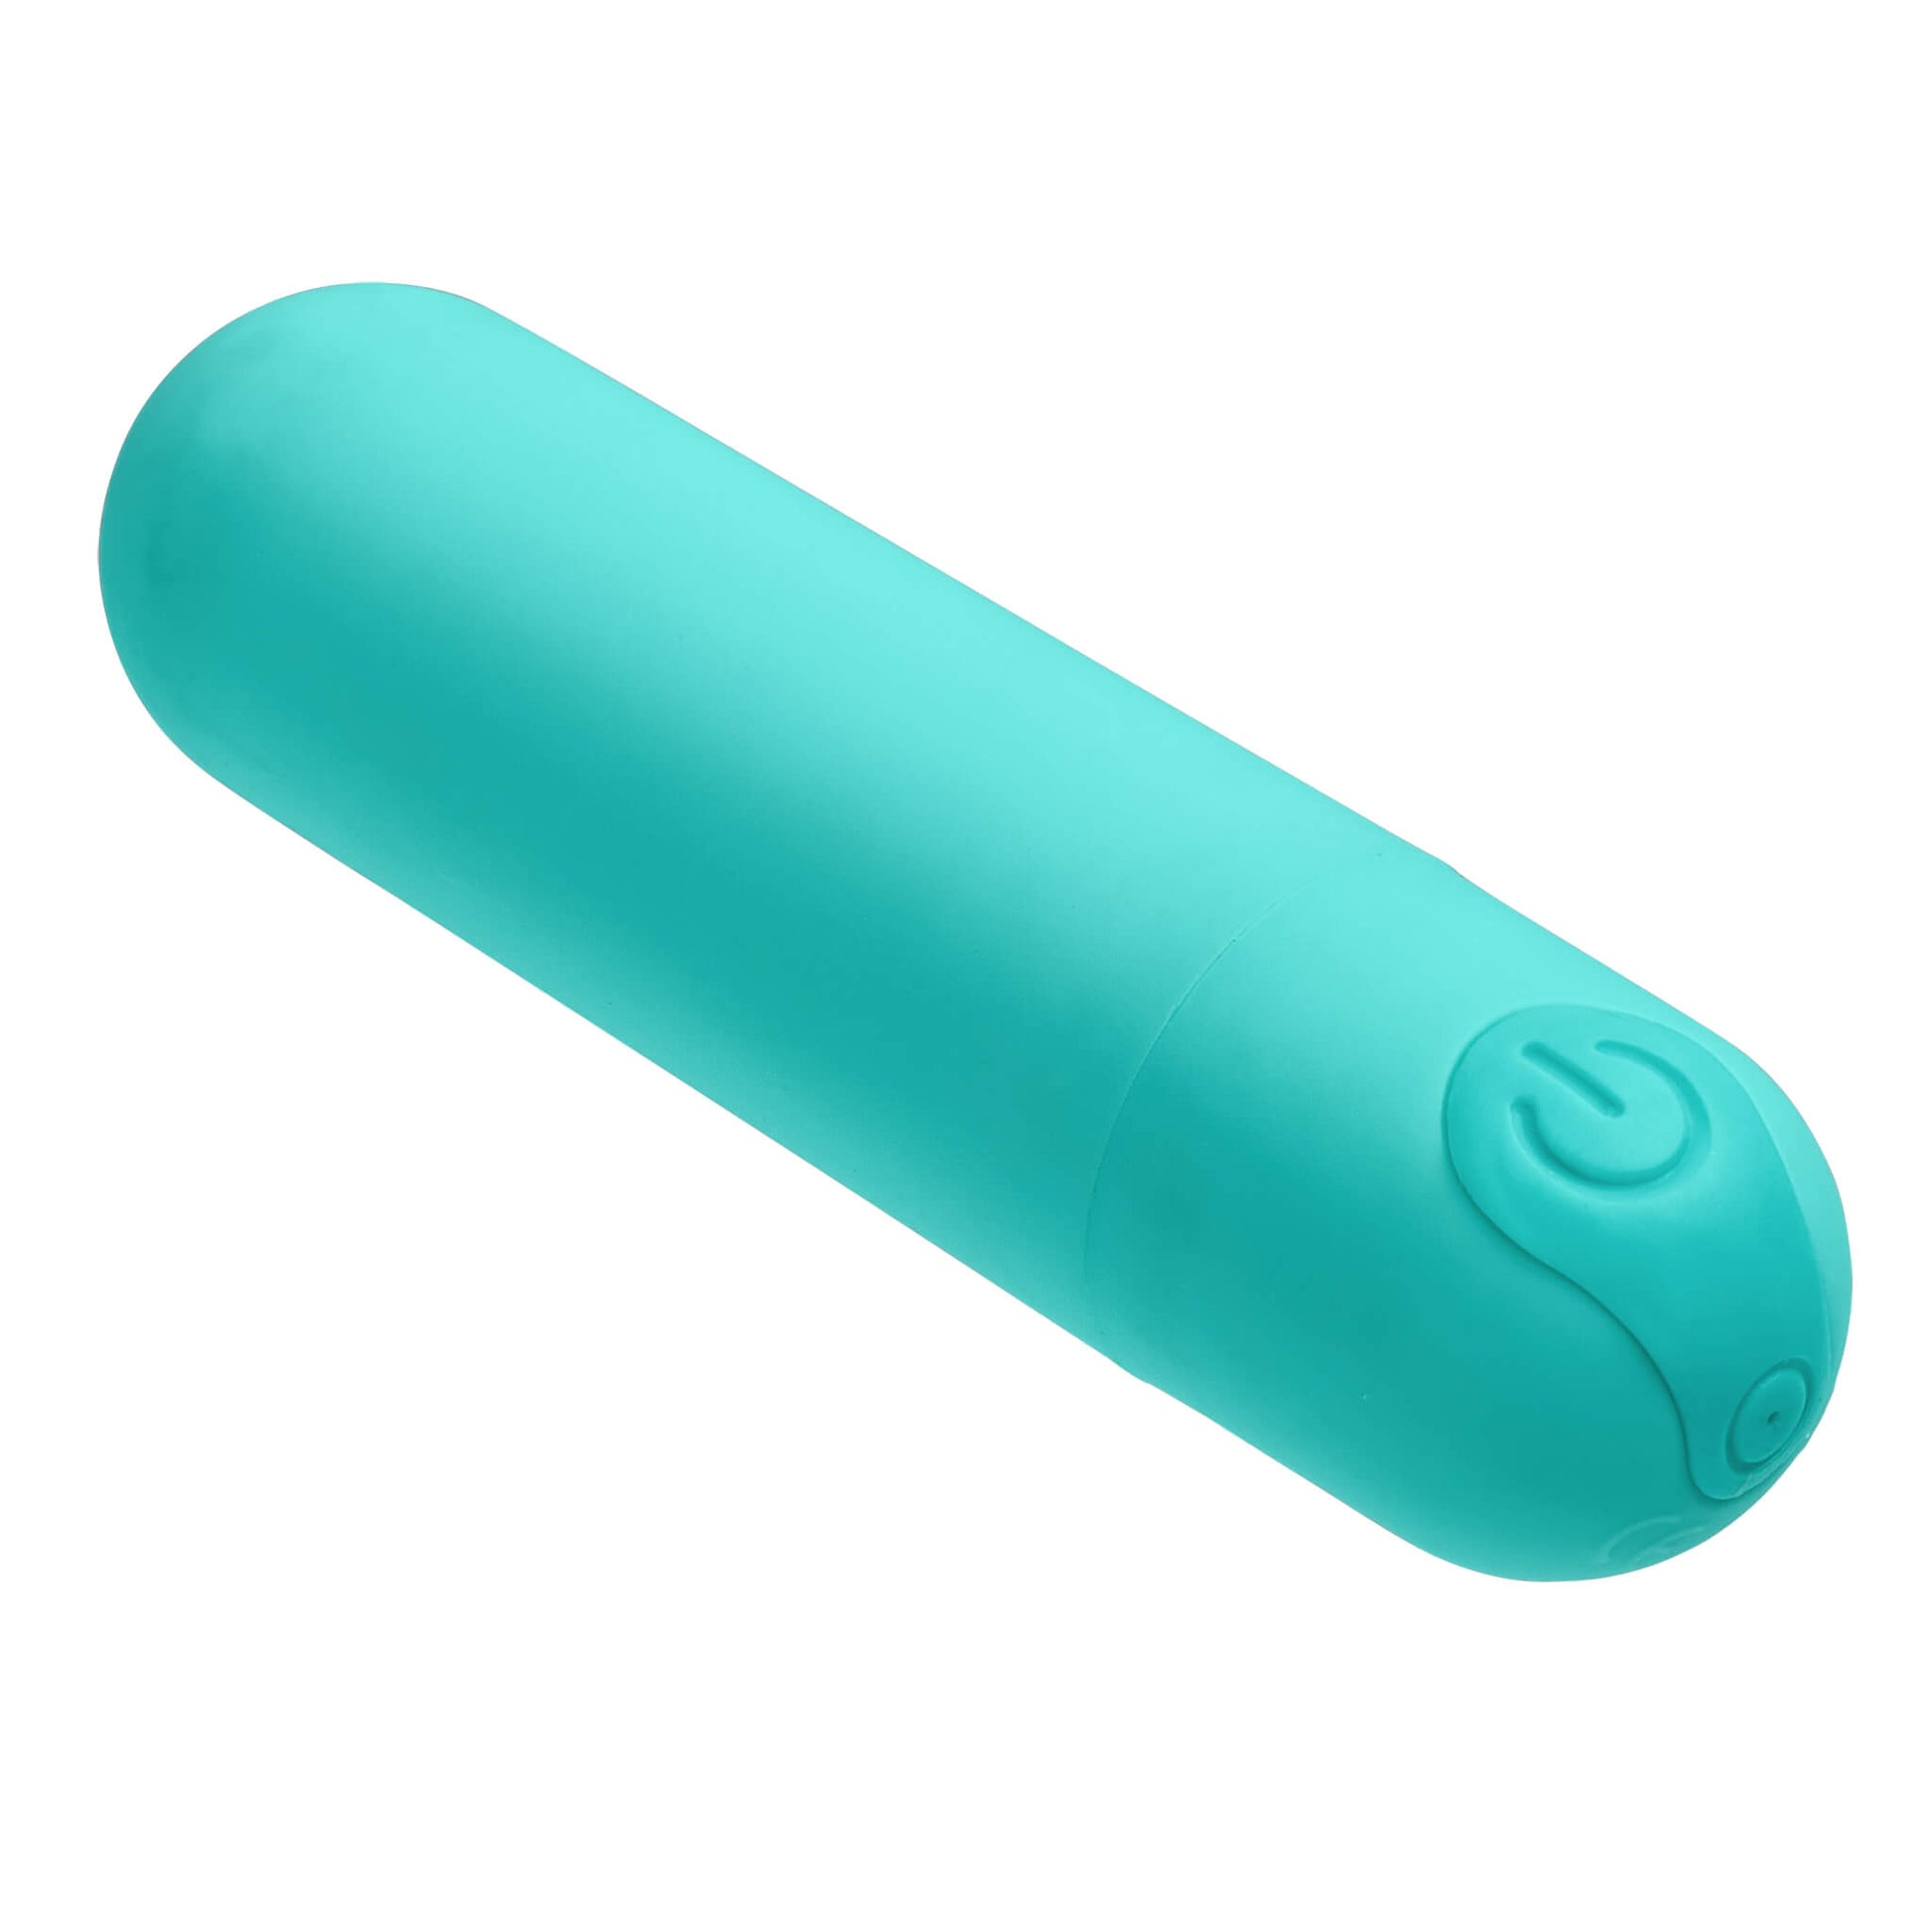 Image shows the plastic vibrator from the Cloud 9 Rocker Prostate Stimulator sitting out by itself without the prostate stimulator sheath on it. The image shows that this teal plastic vibrator is a small, portable, bullet vibrator. | Kinkly Shop